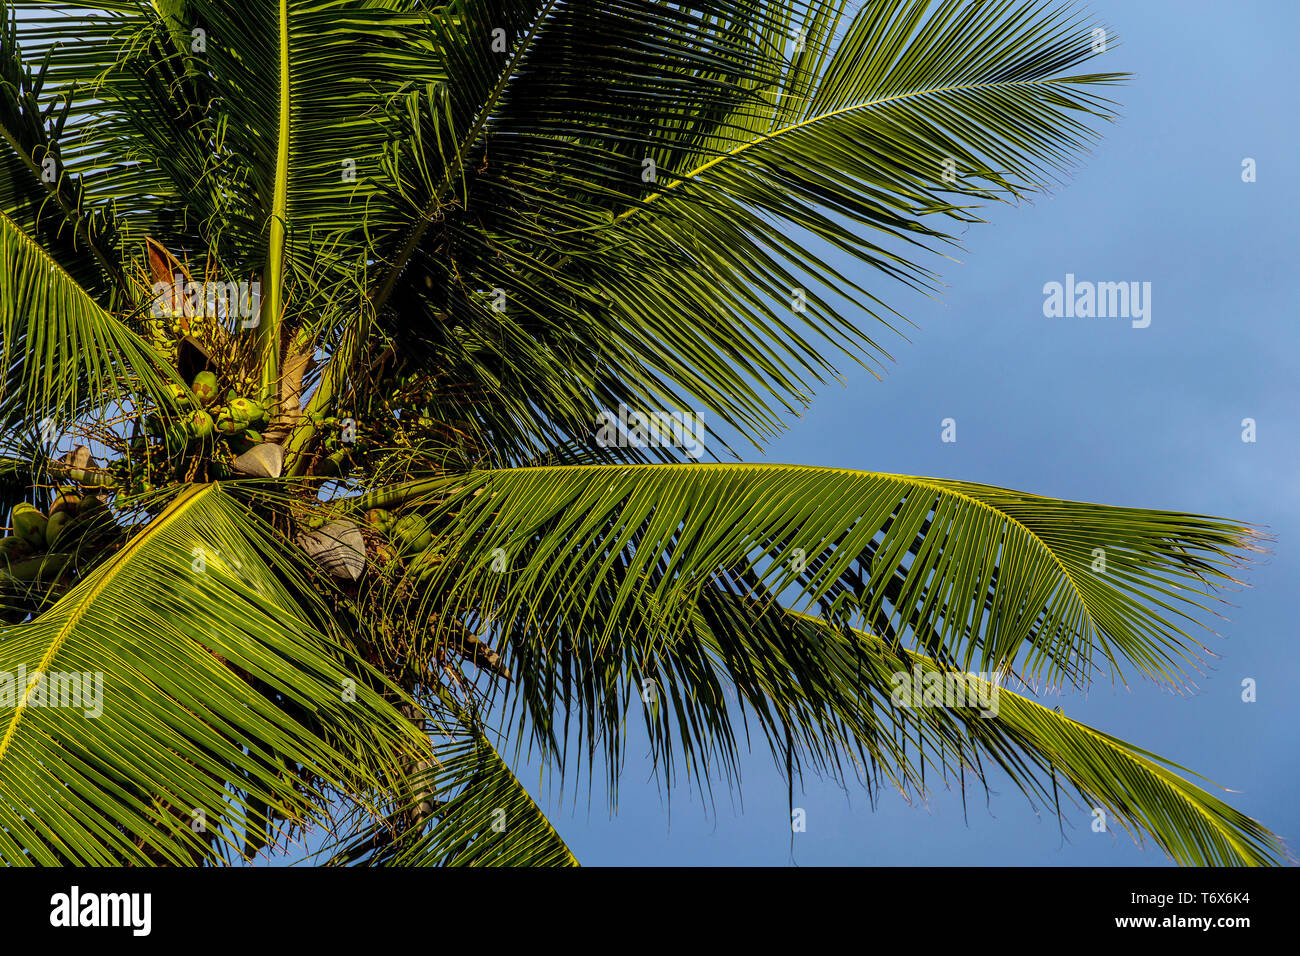 top of coconut palm with unripe green coconuts against a blue sky in sunny weather Stock Photo